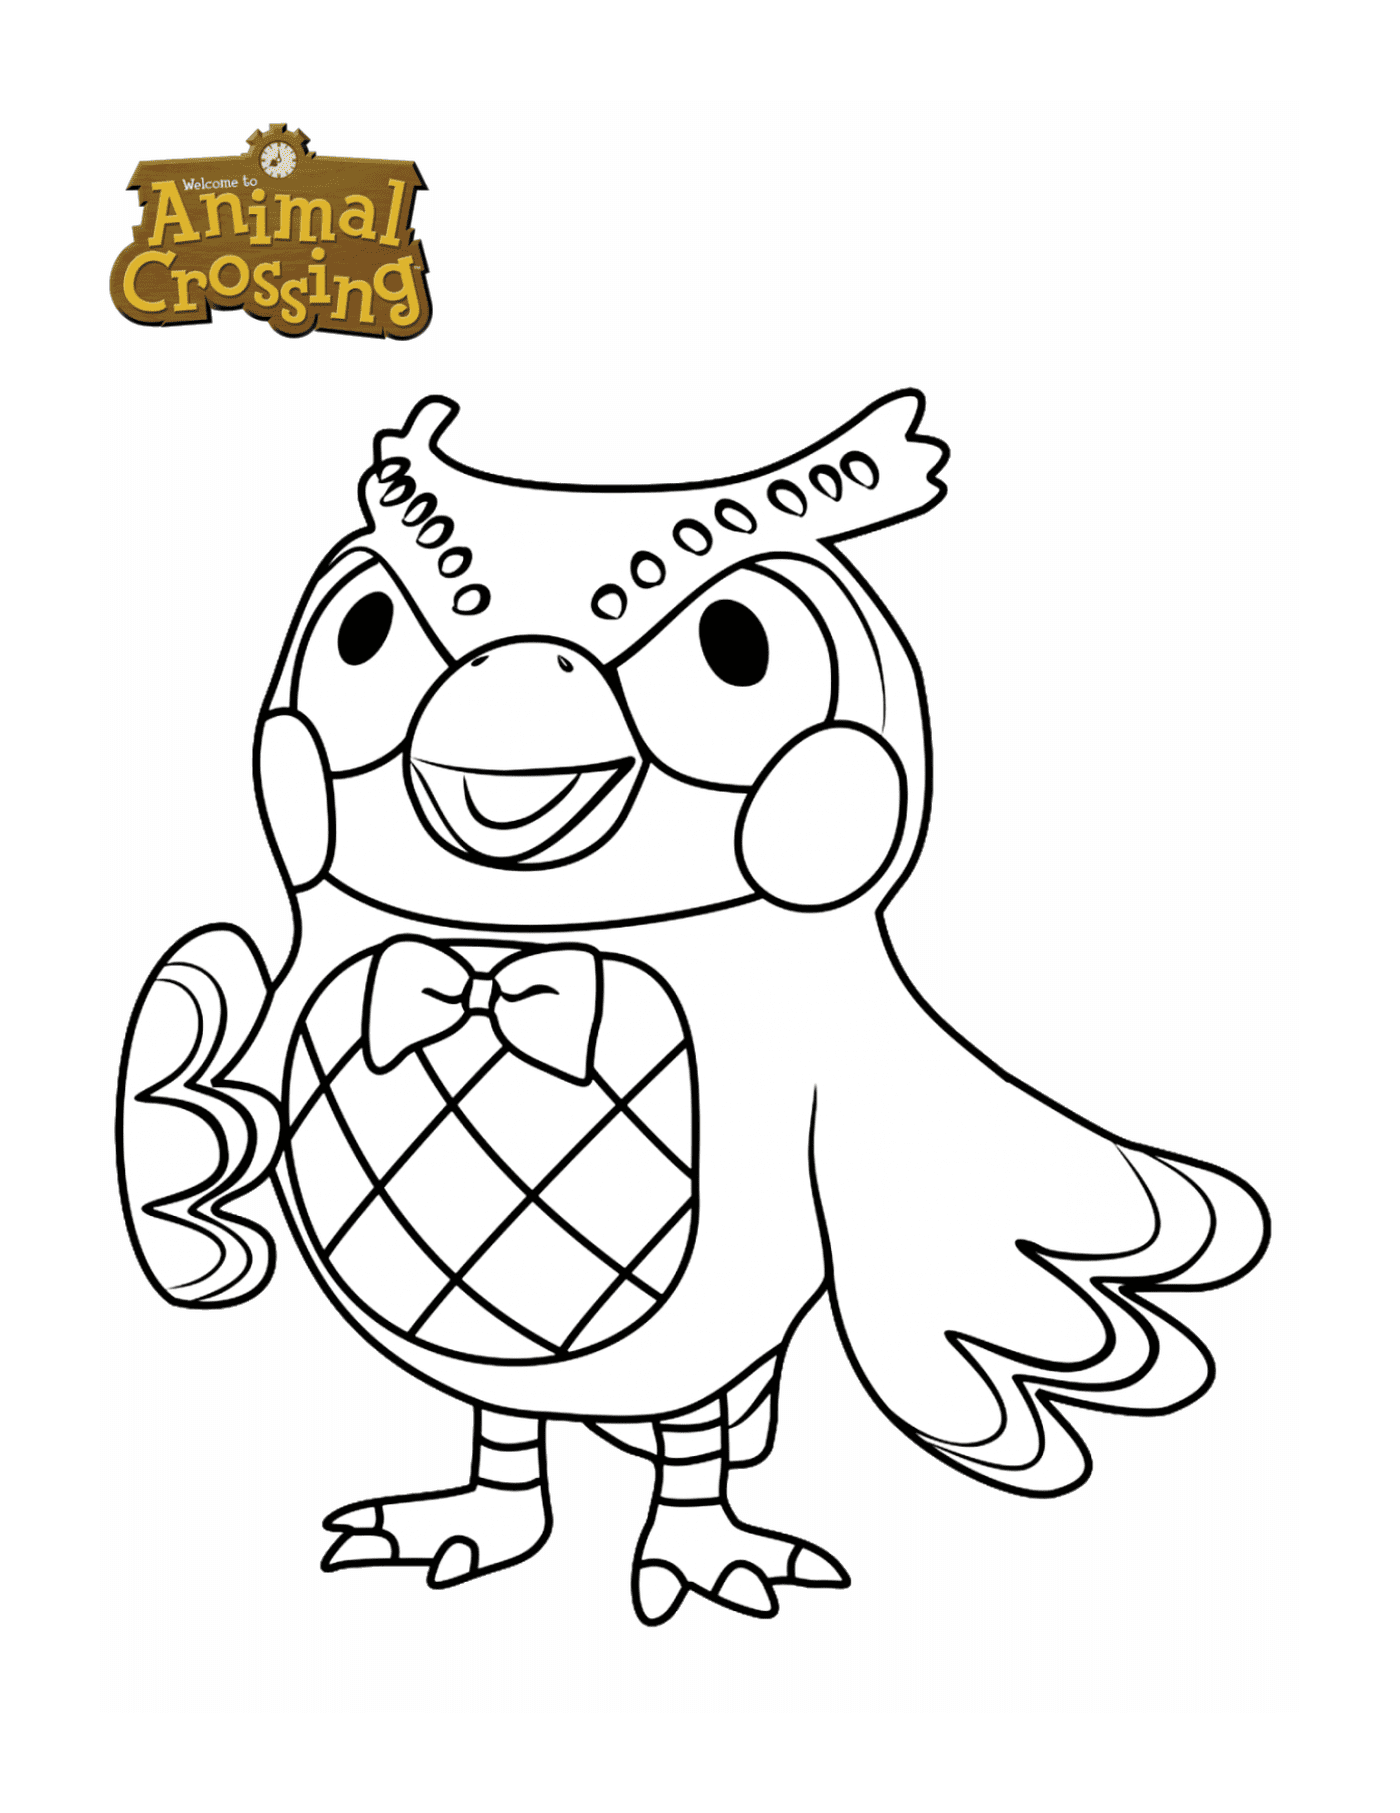  Blathers, owl with bow tie 